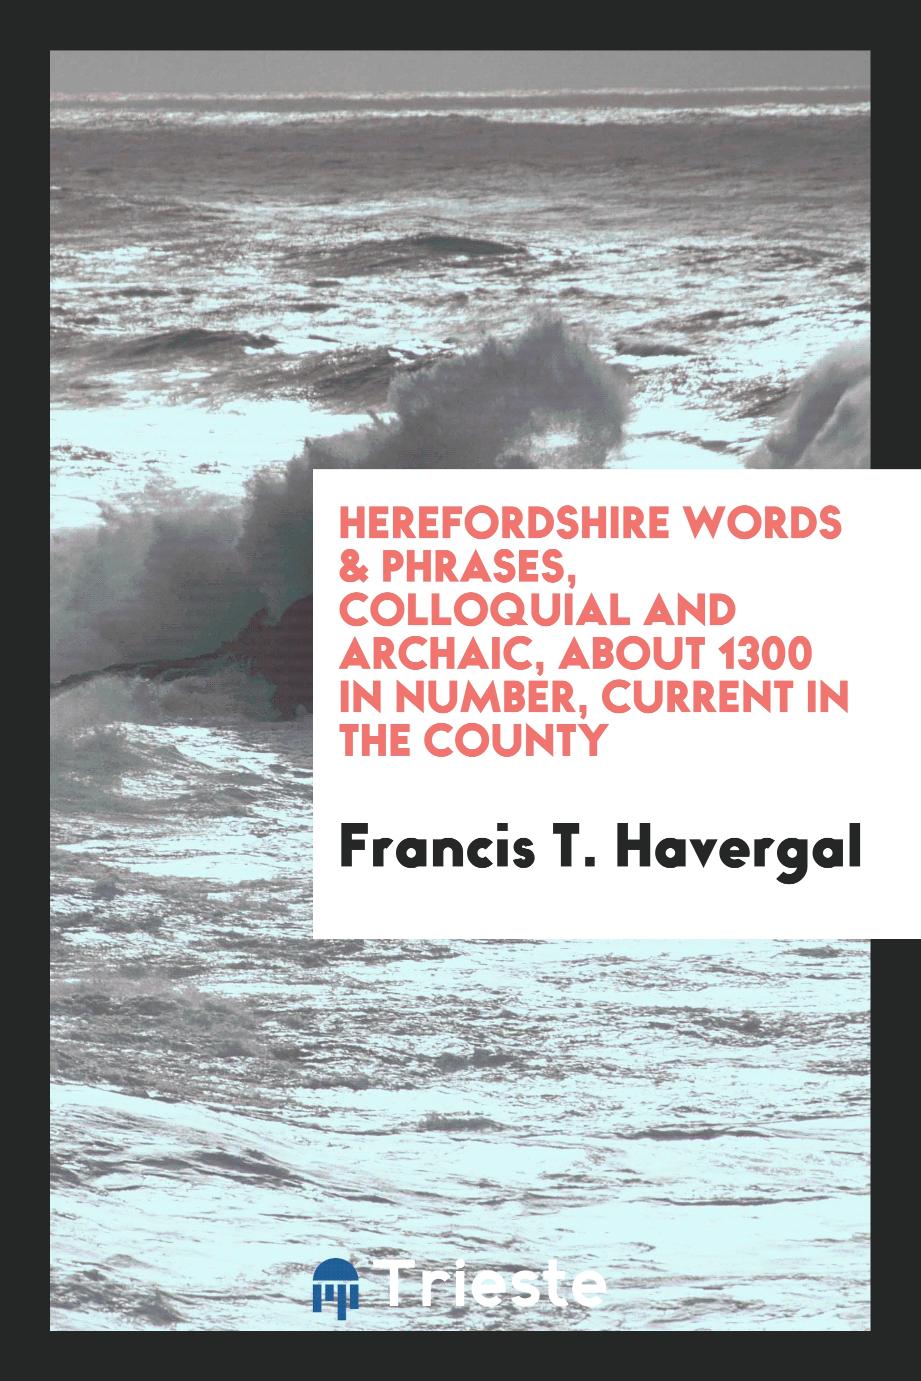 Herefordshire Words & Phrases, Colloquial and Archaic, about 1300 in Number, Current in the County